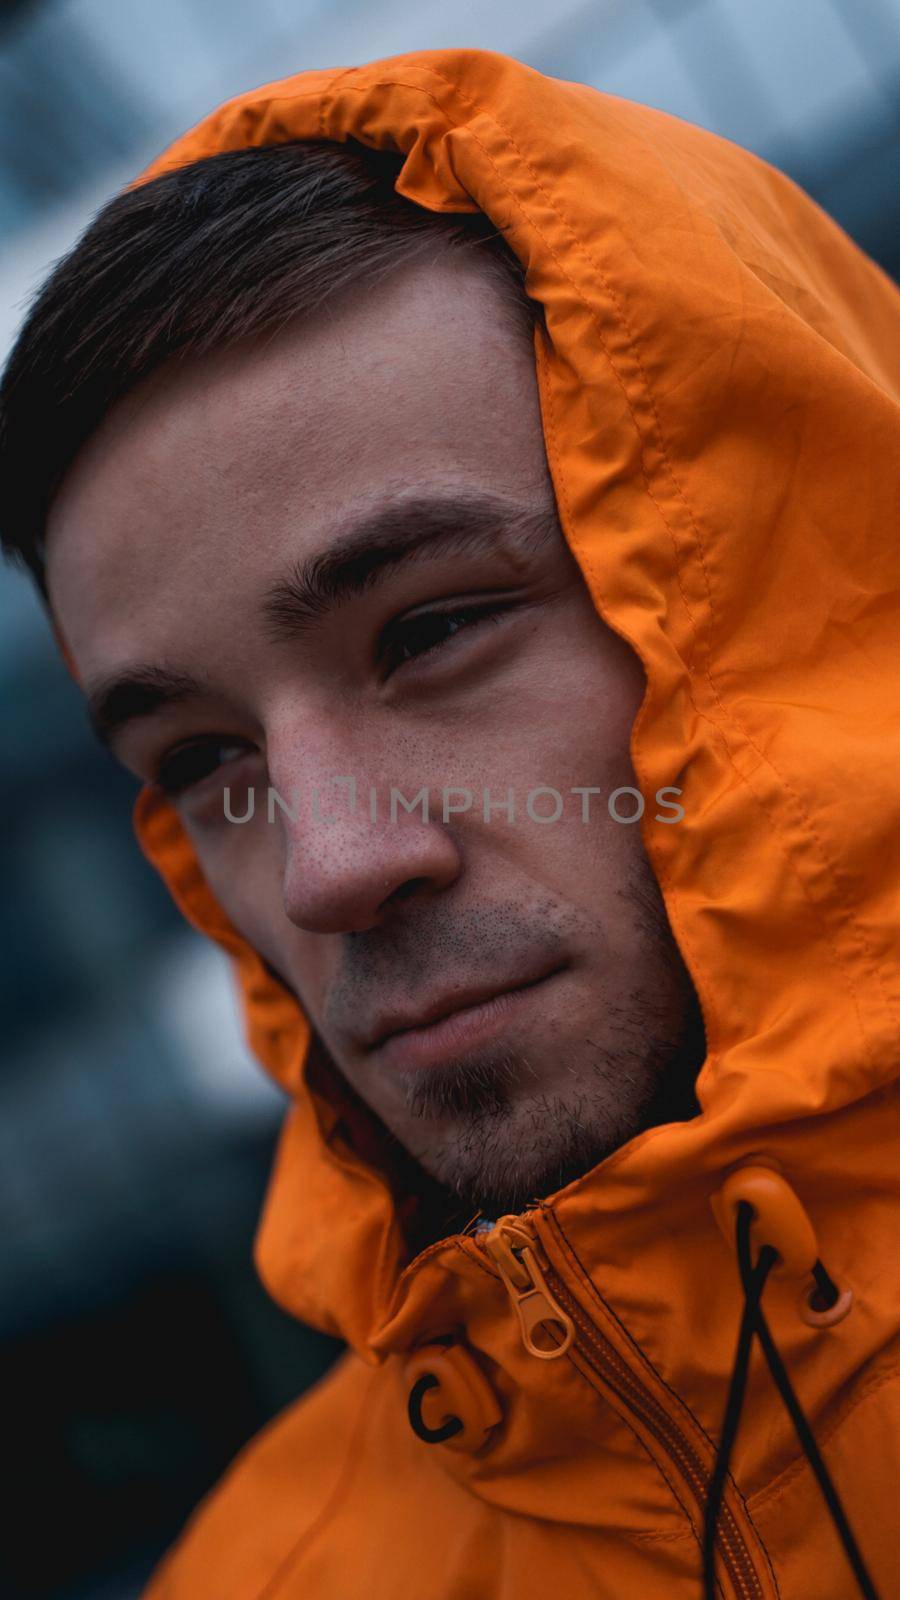 Young man in orange work uniform - blue glass building on background